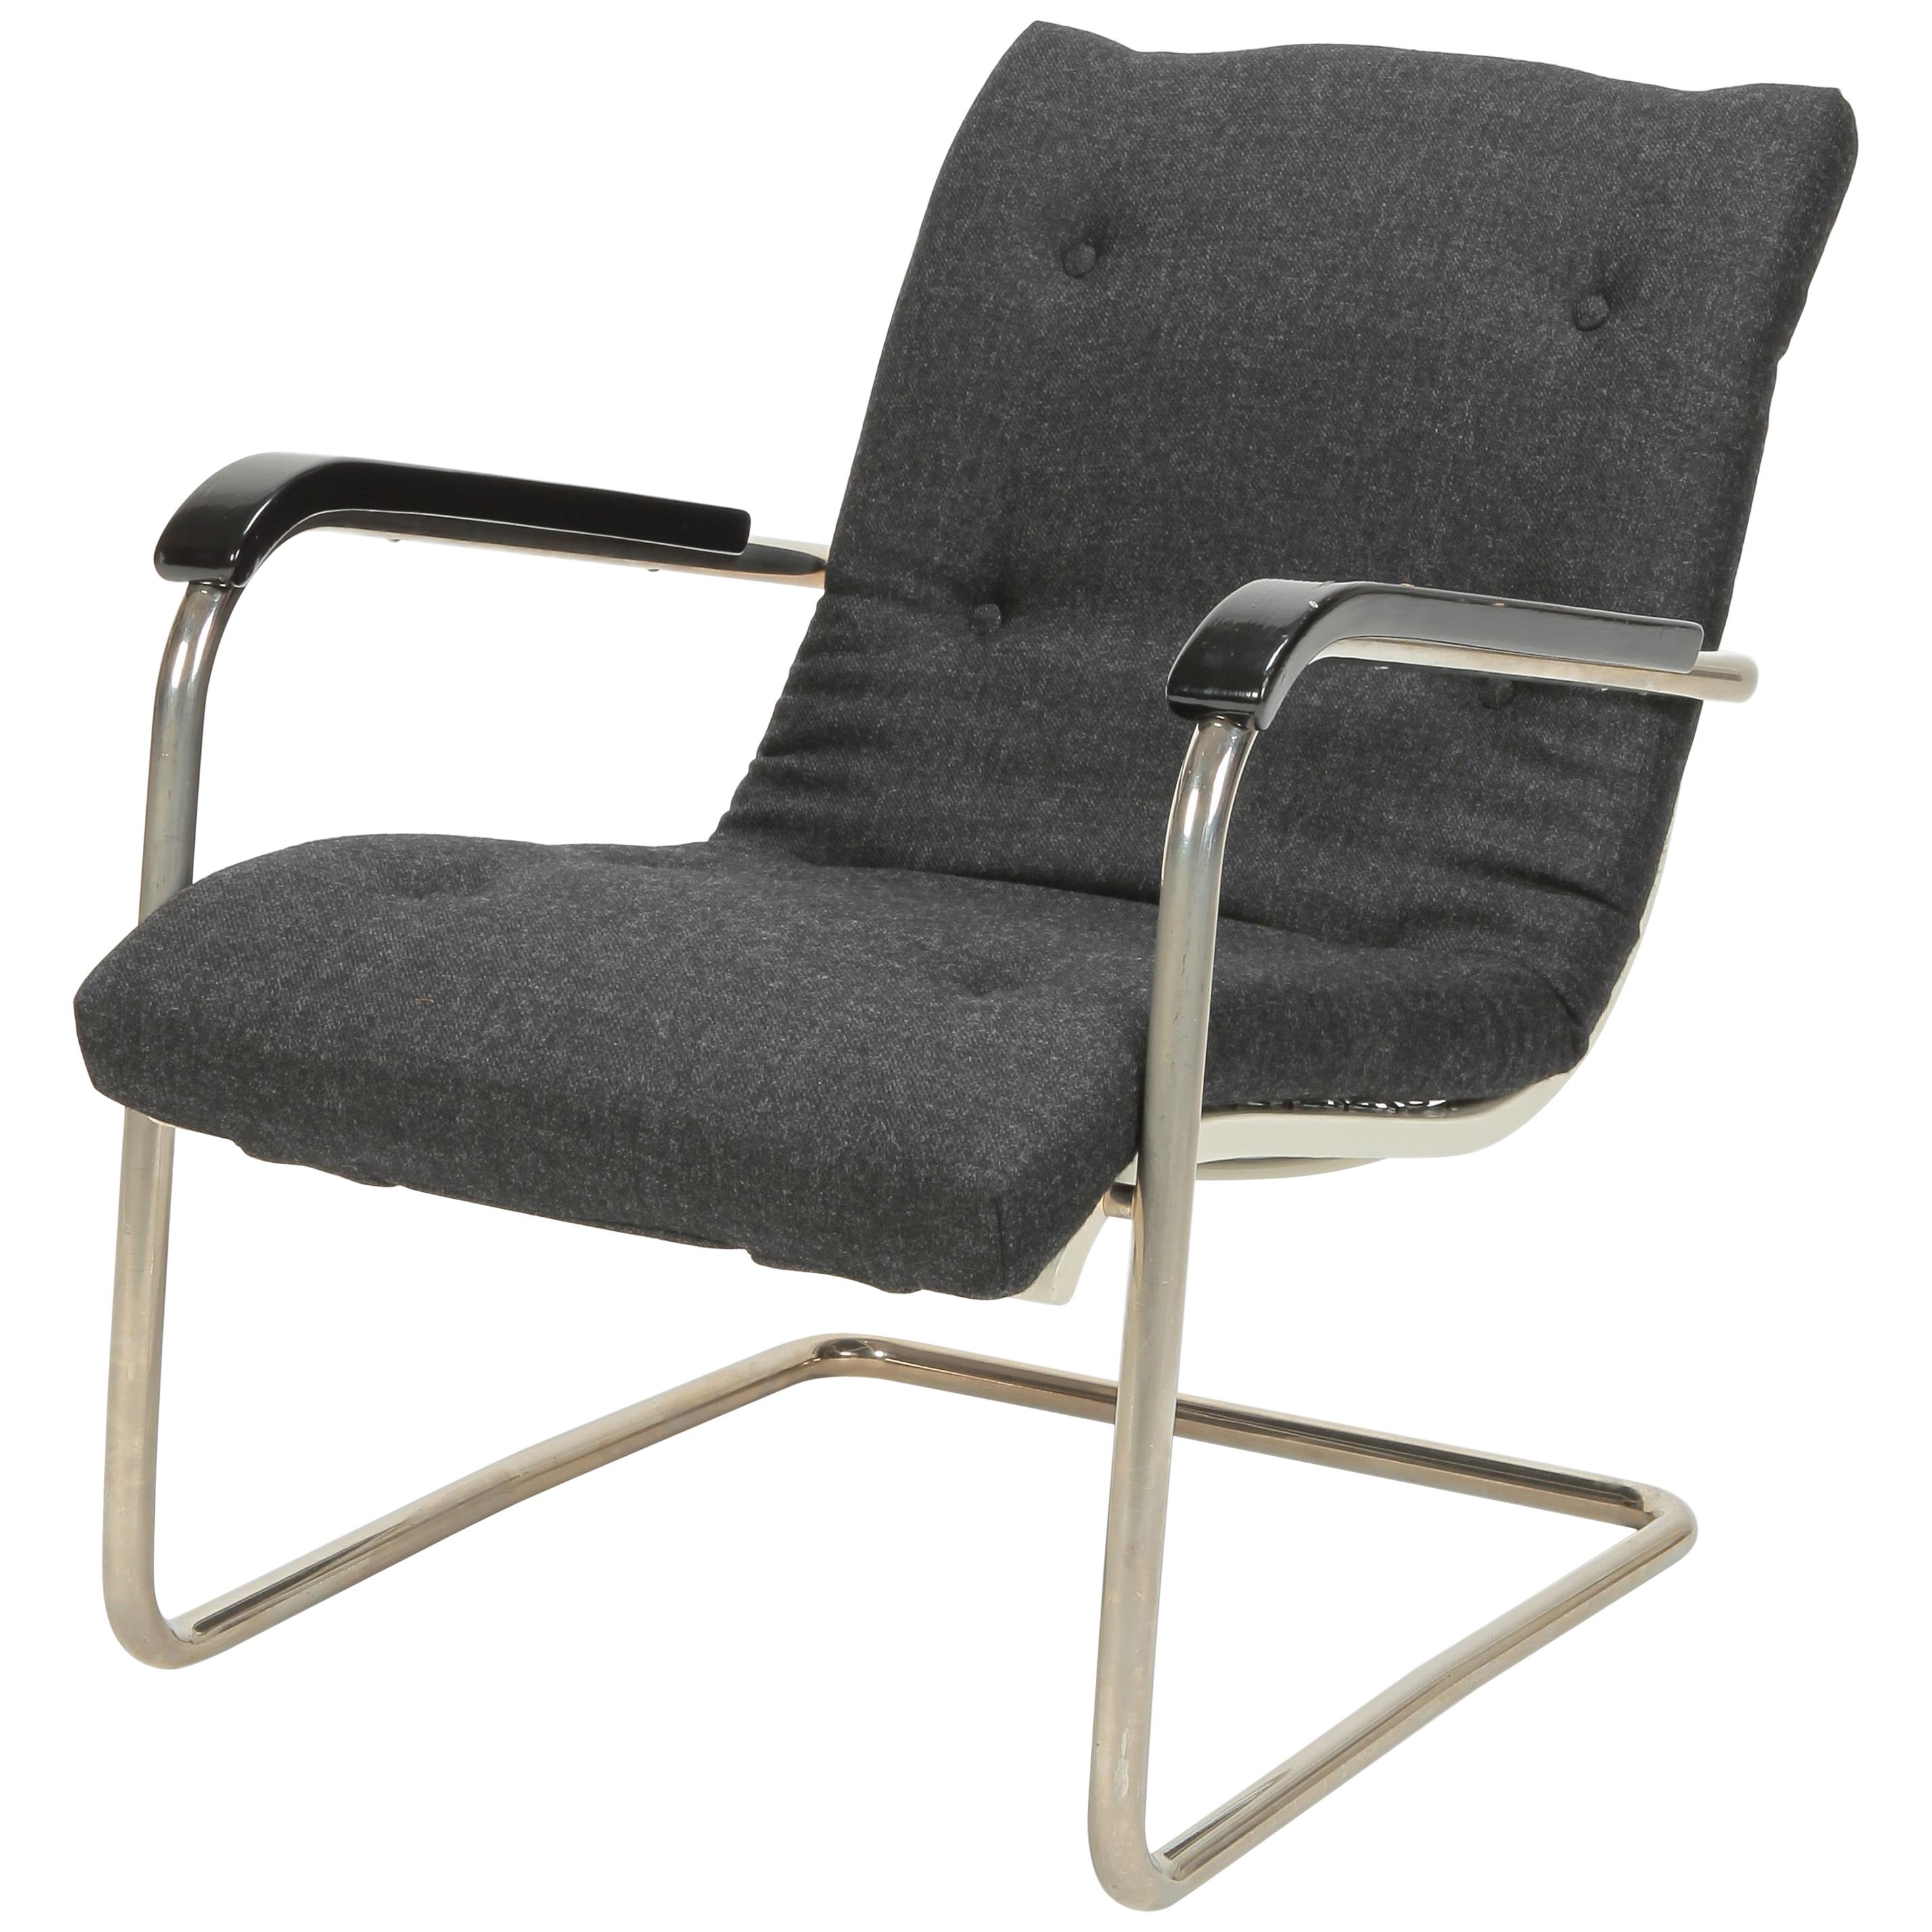 Werner Max Moser "Peoples Chair" Model 23 For Sale